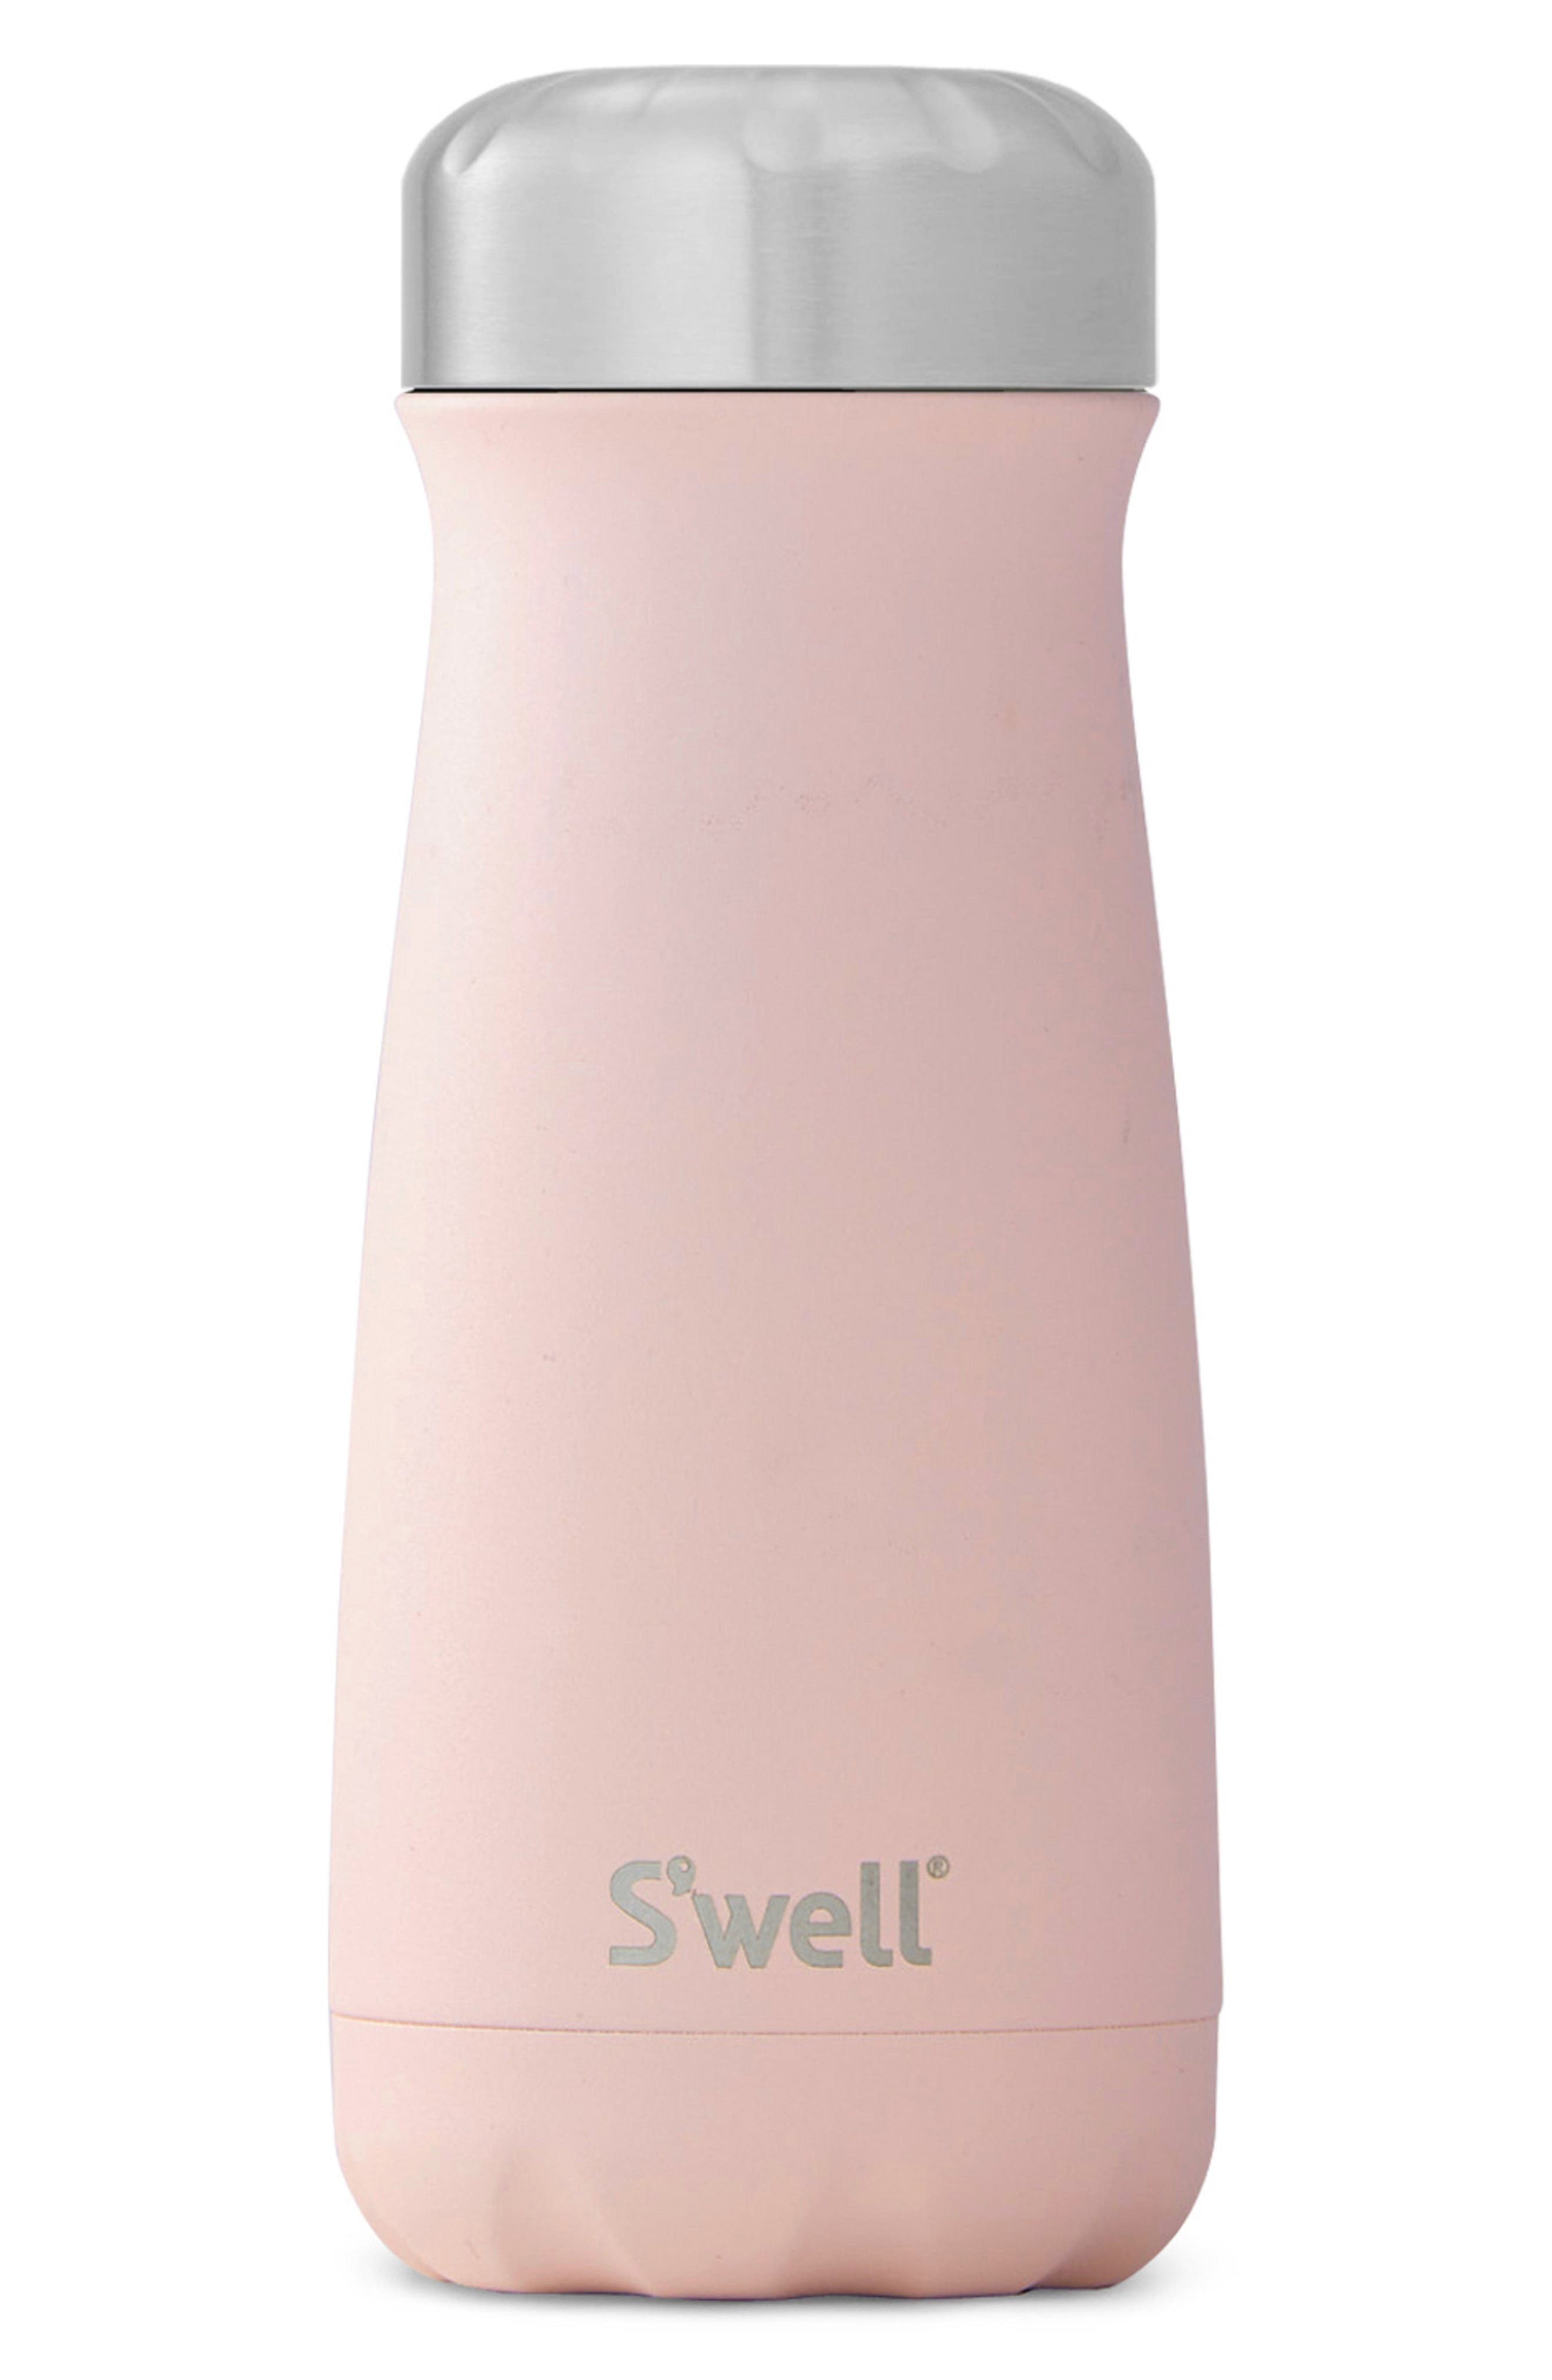 S’well Stainless Steel Insulated Water Bottle 17 Oz 500ml Swb-blue02 for sale online 